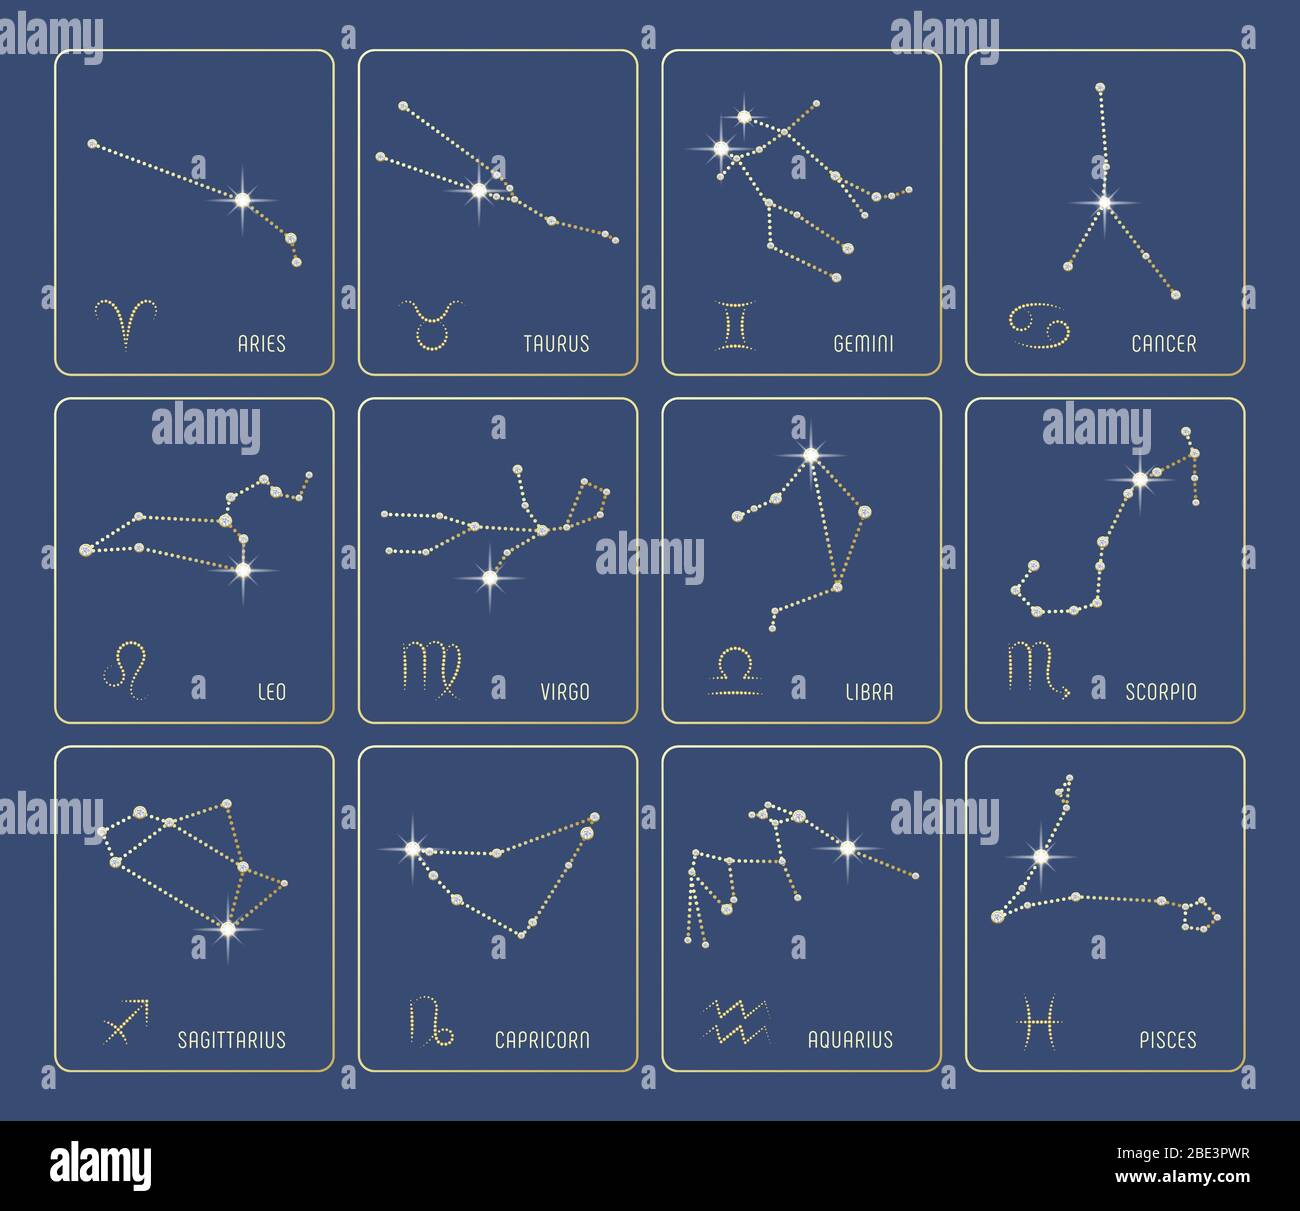 12 Constellations Of The Zodiac Signs